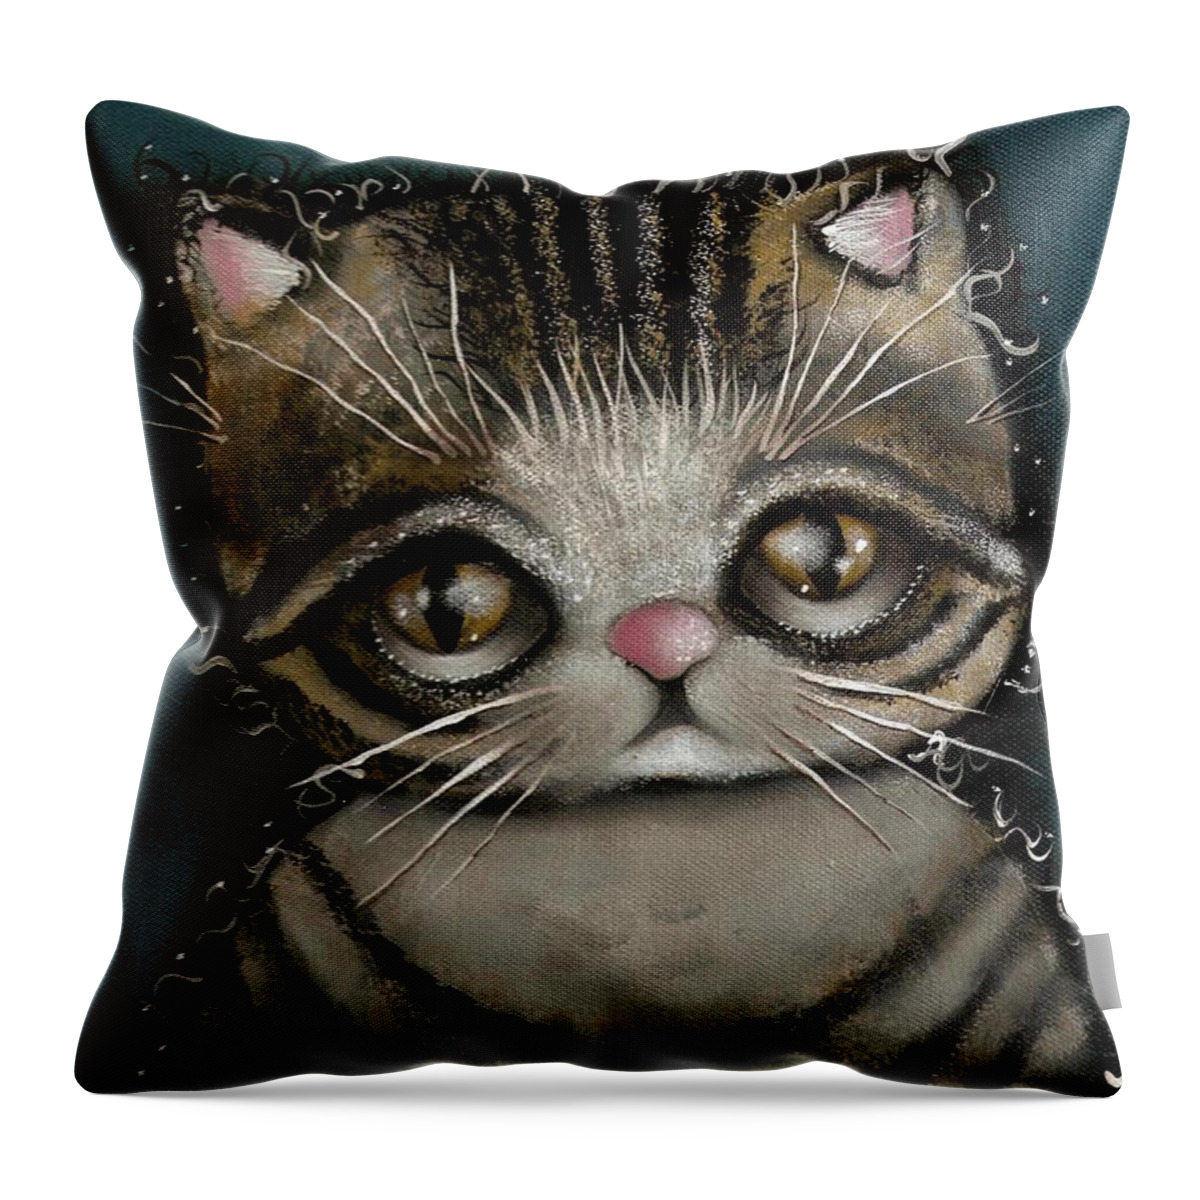 Kittie Cat Throw Pillow featuring the painting Tully by Abril Andrade